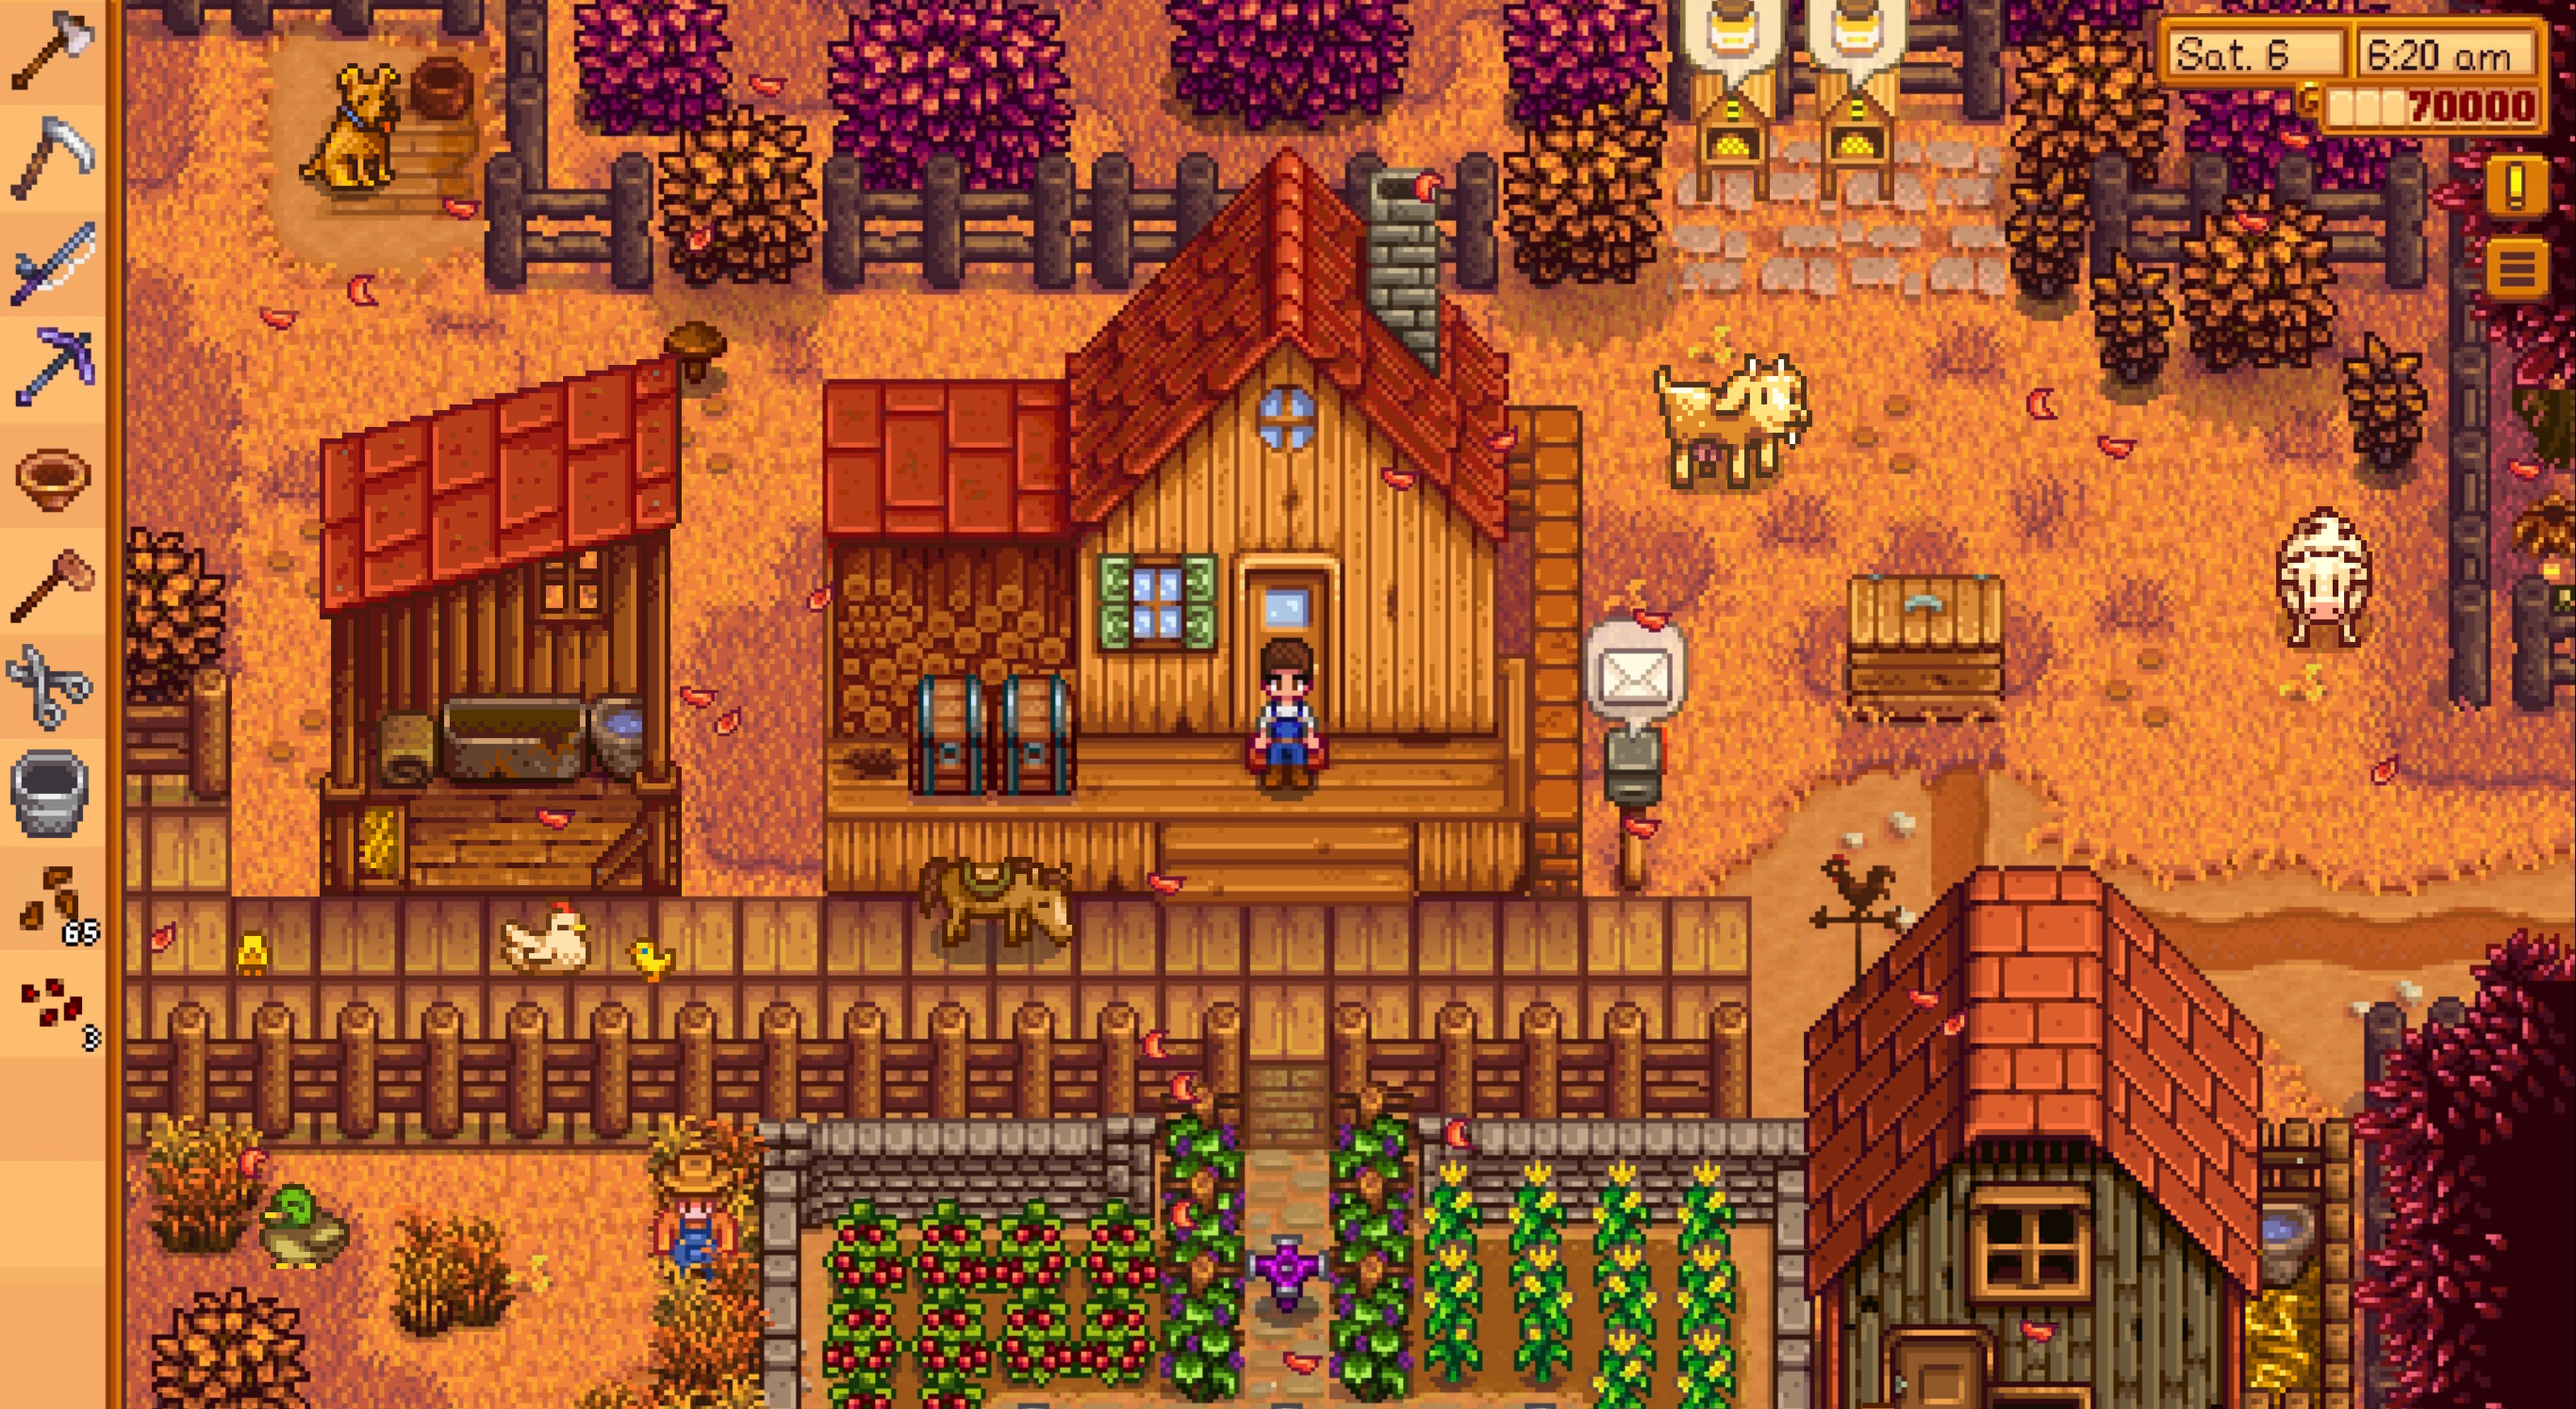 Stardew Valley - Stardew Valley coming to mobile